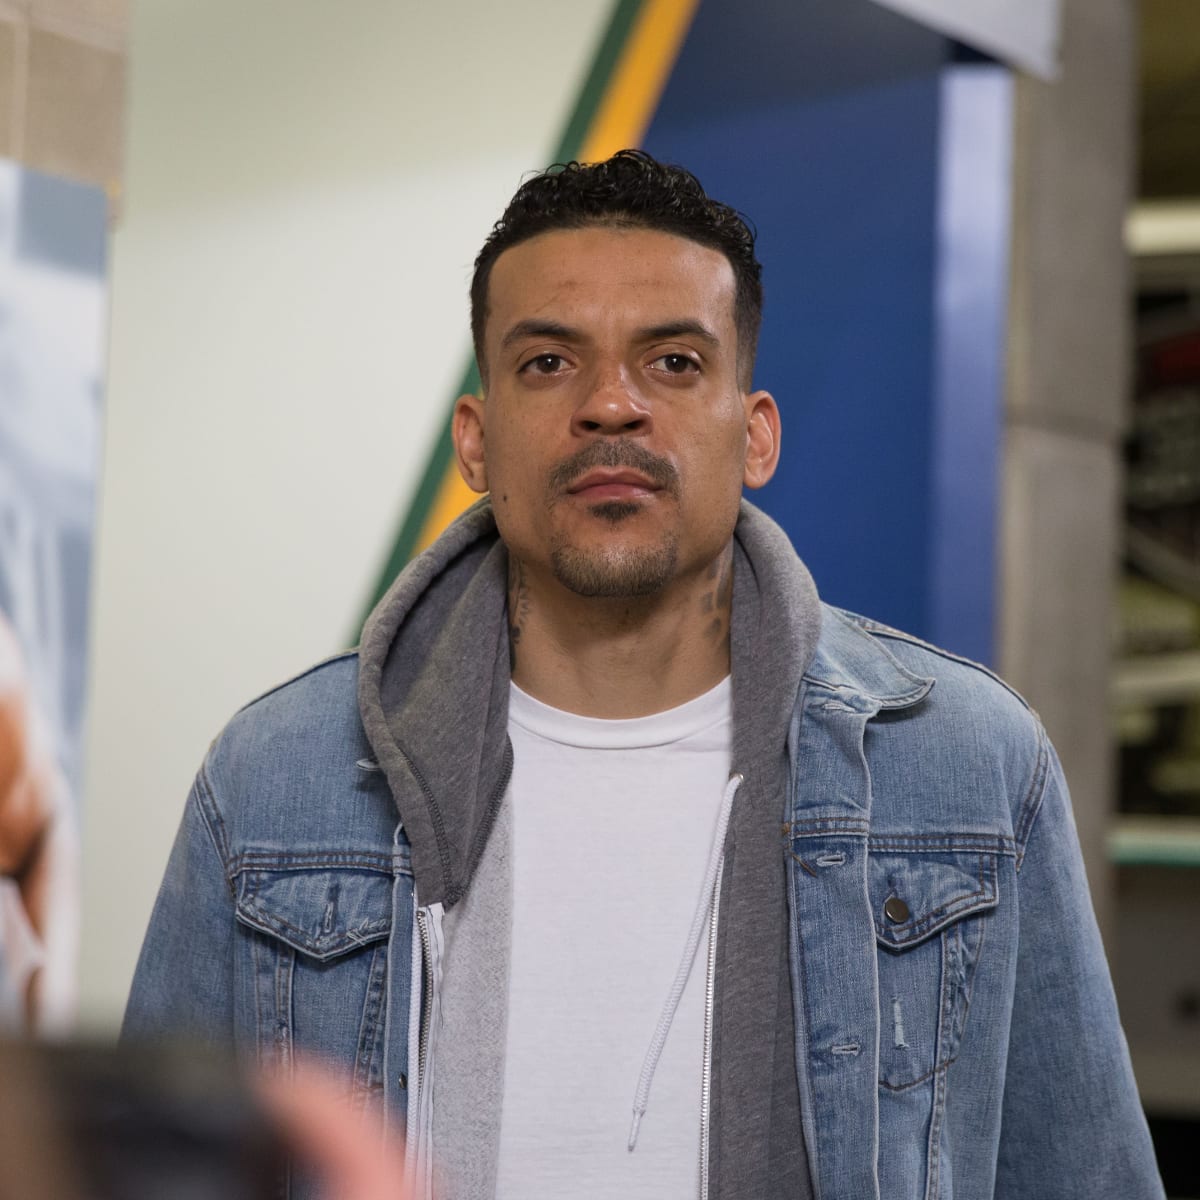 Matt Barnes EXP0SED By Girlfriend's Ex HARASSING His Fiancé After He's  OUTED Mistreating STEP-KlDS 